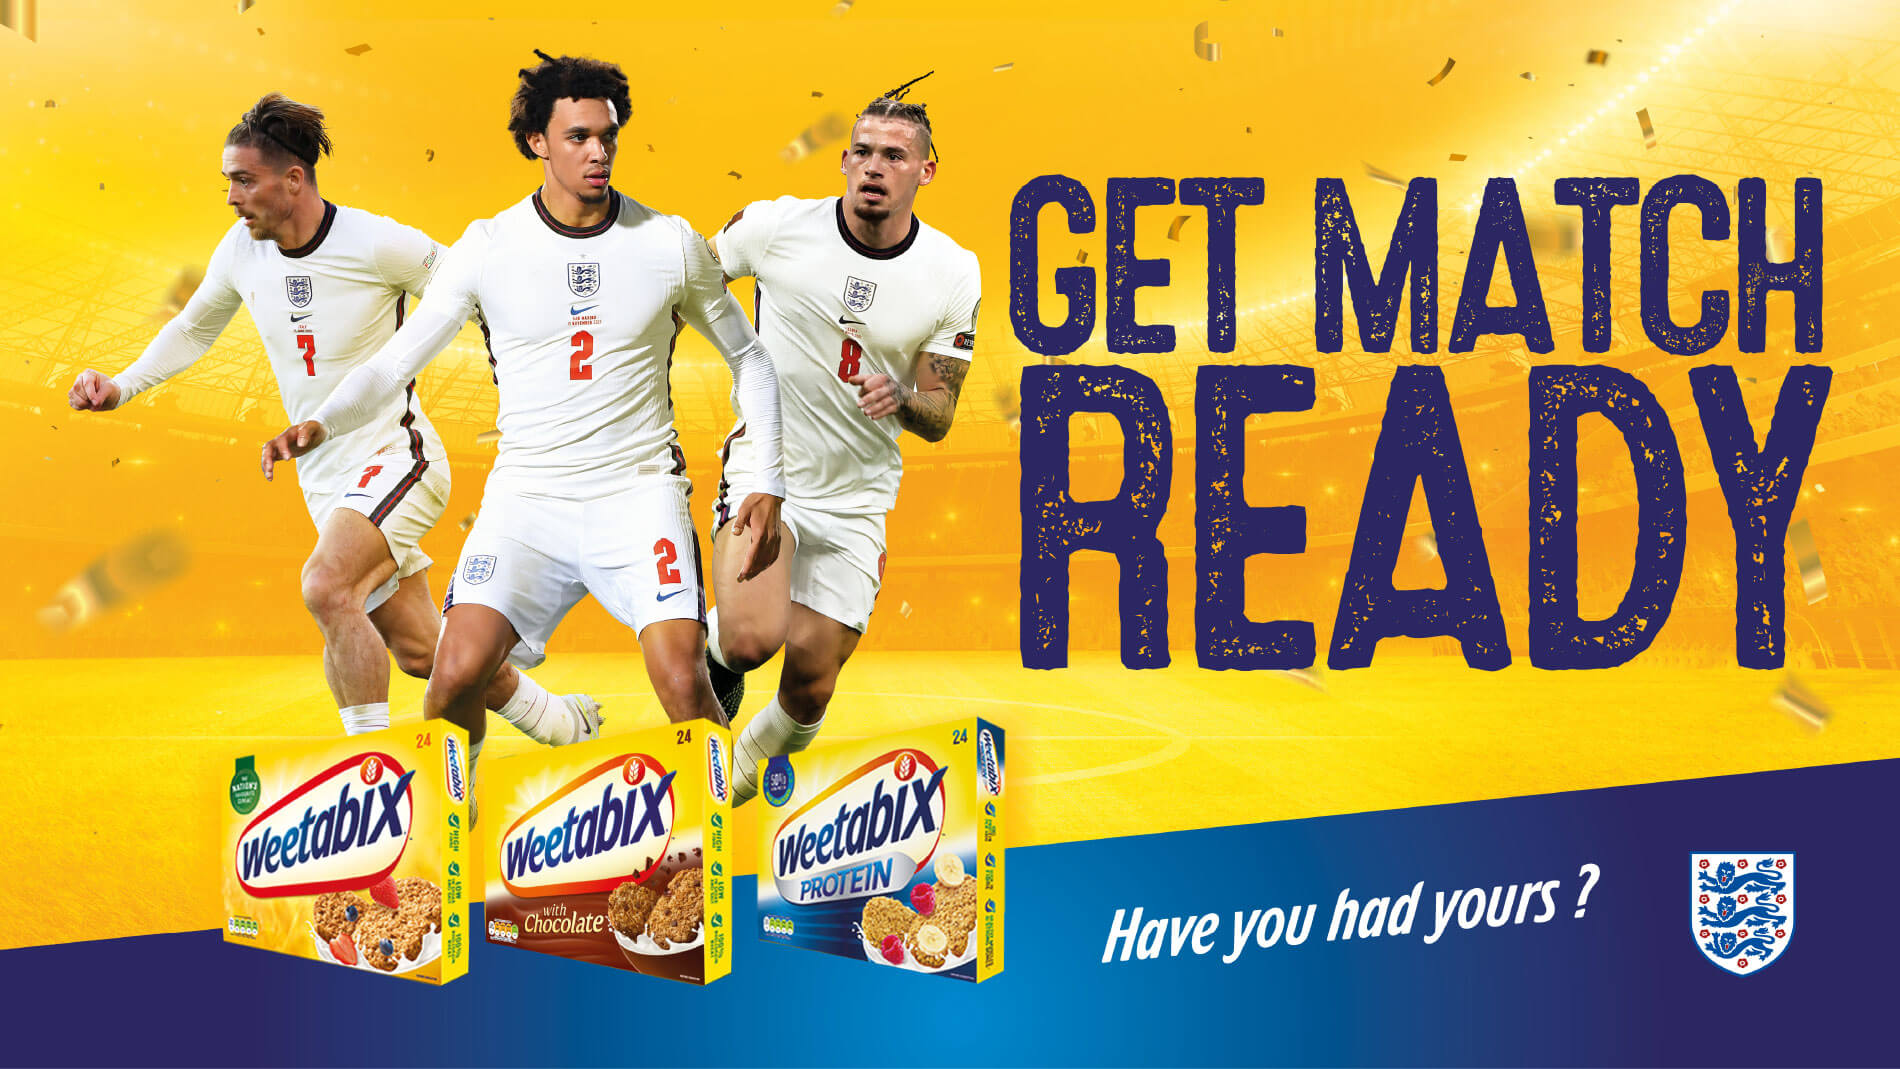 Weetabix is organising this World Cup competition and is giving away the chance to win £1,000 cash to a lucky winner!